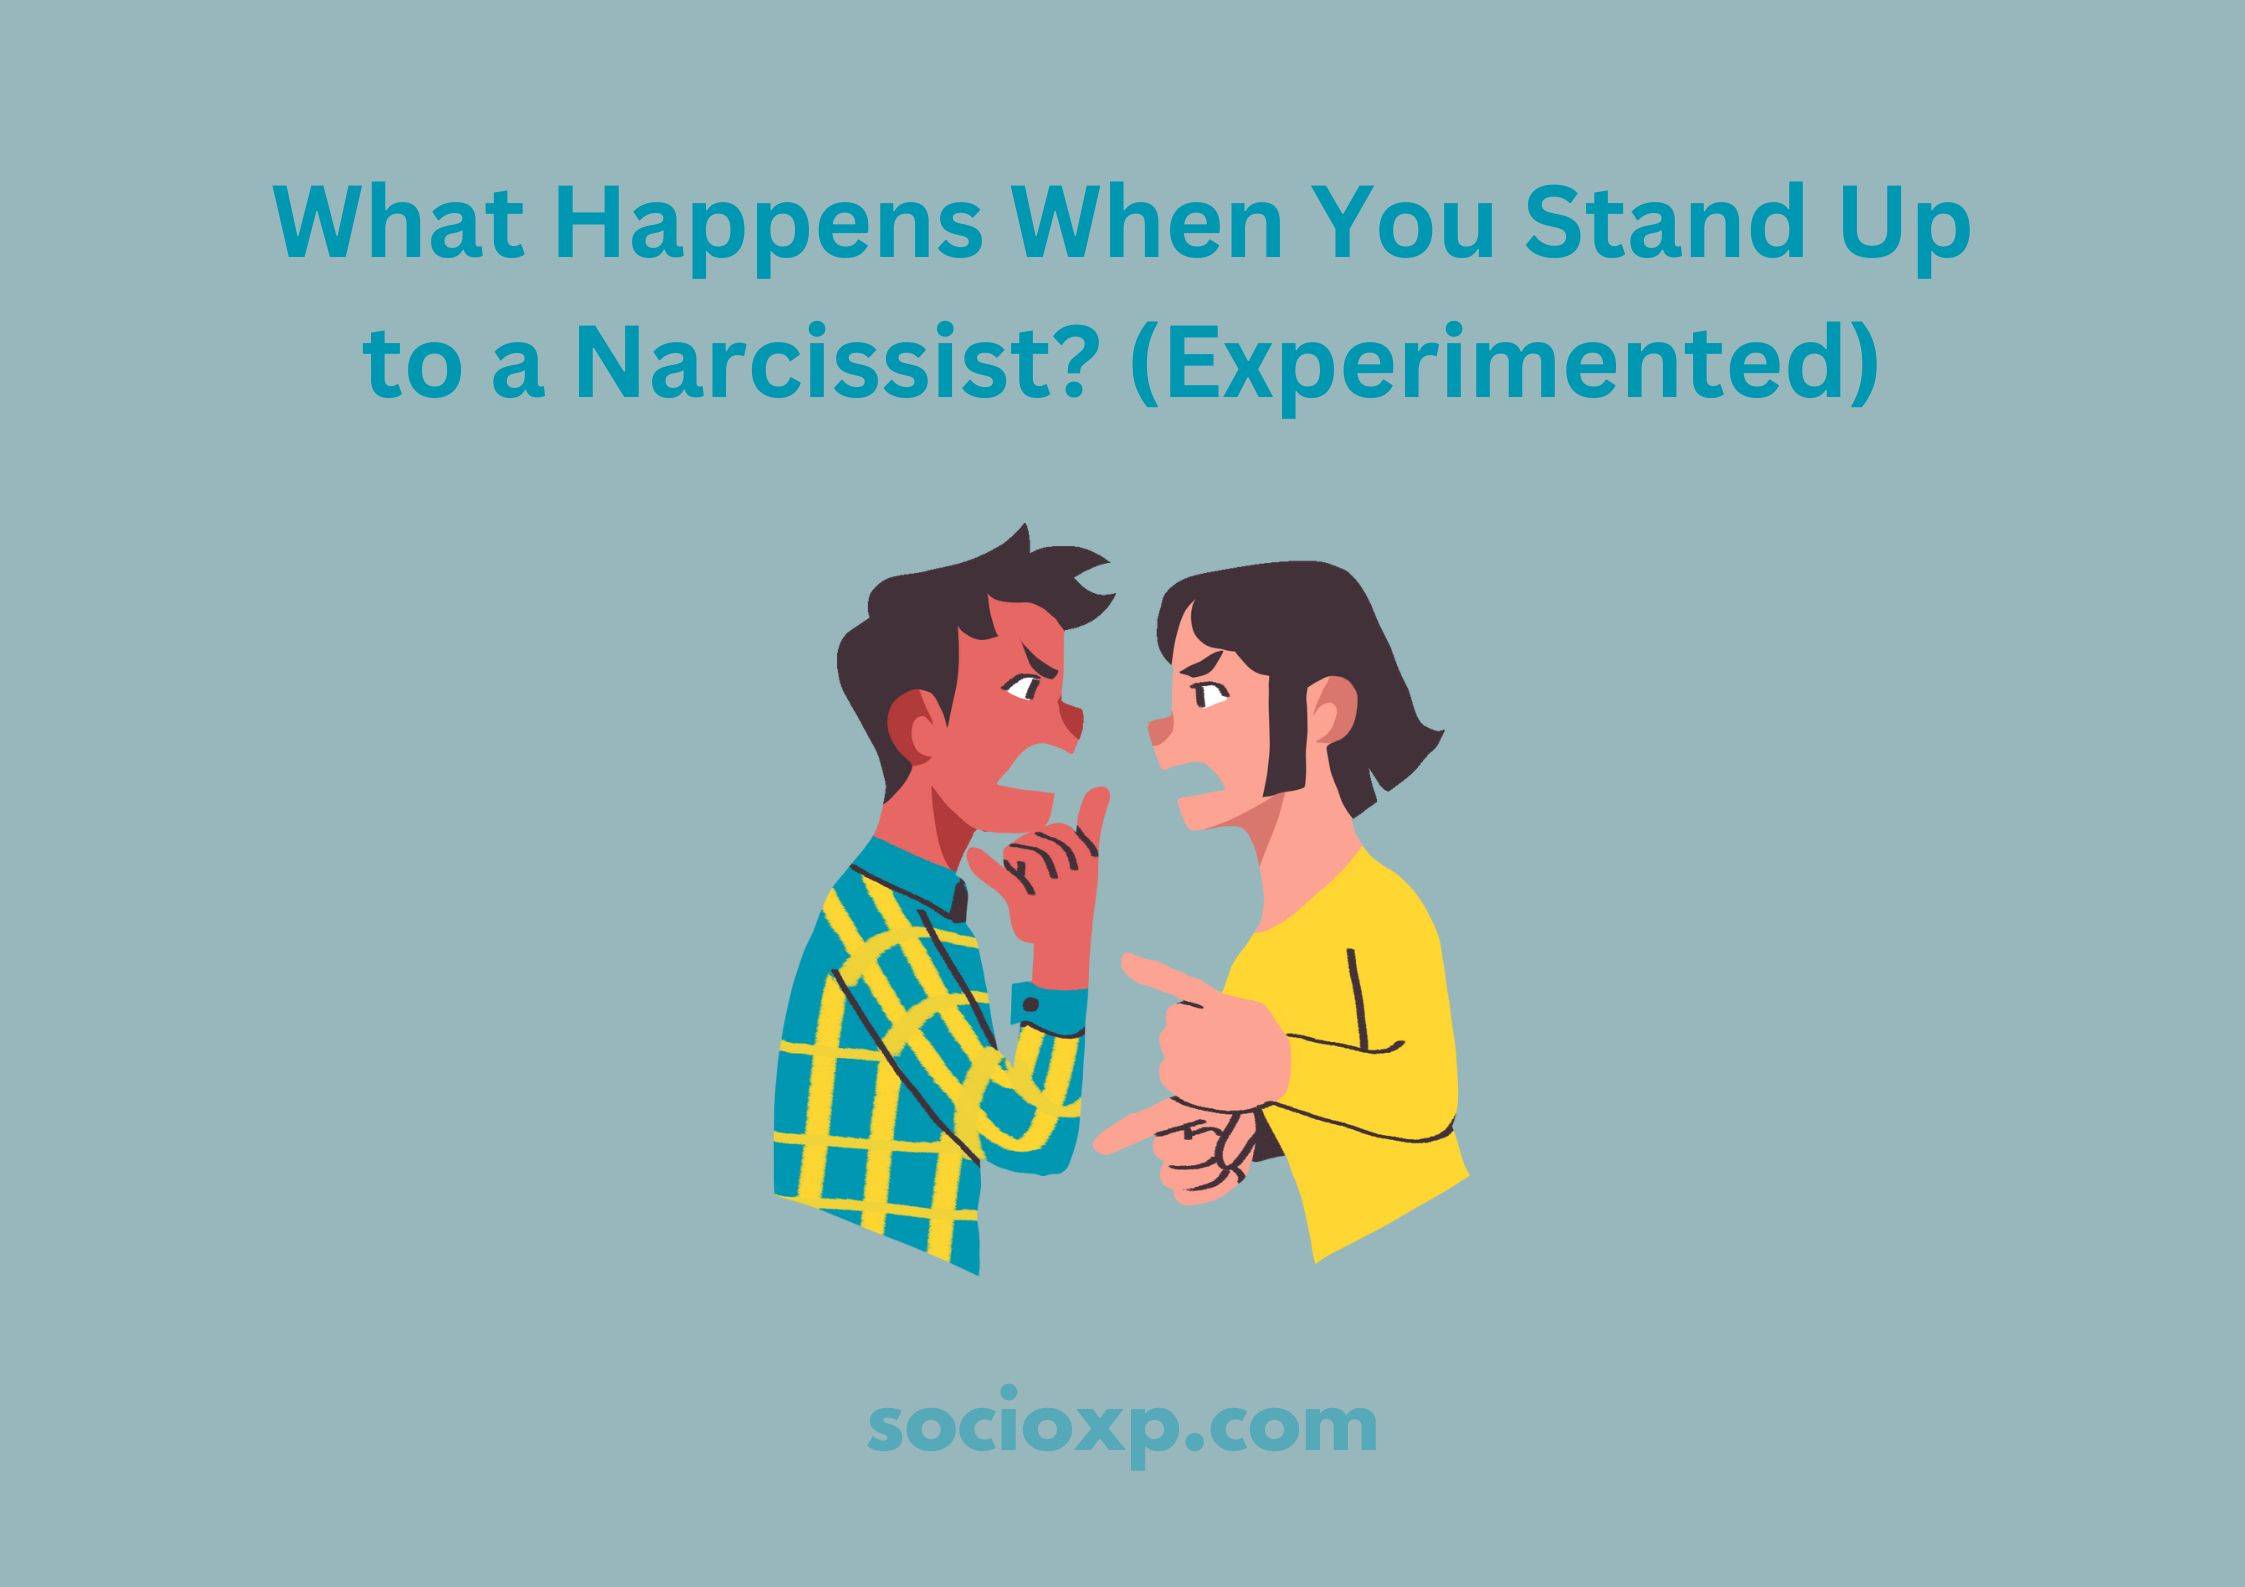 What Happens When You Stand Up to a Narcissist? (Experimented)